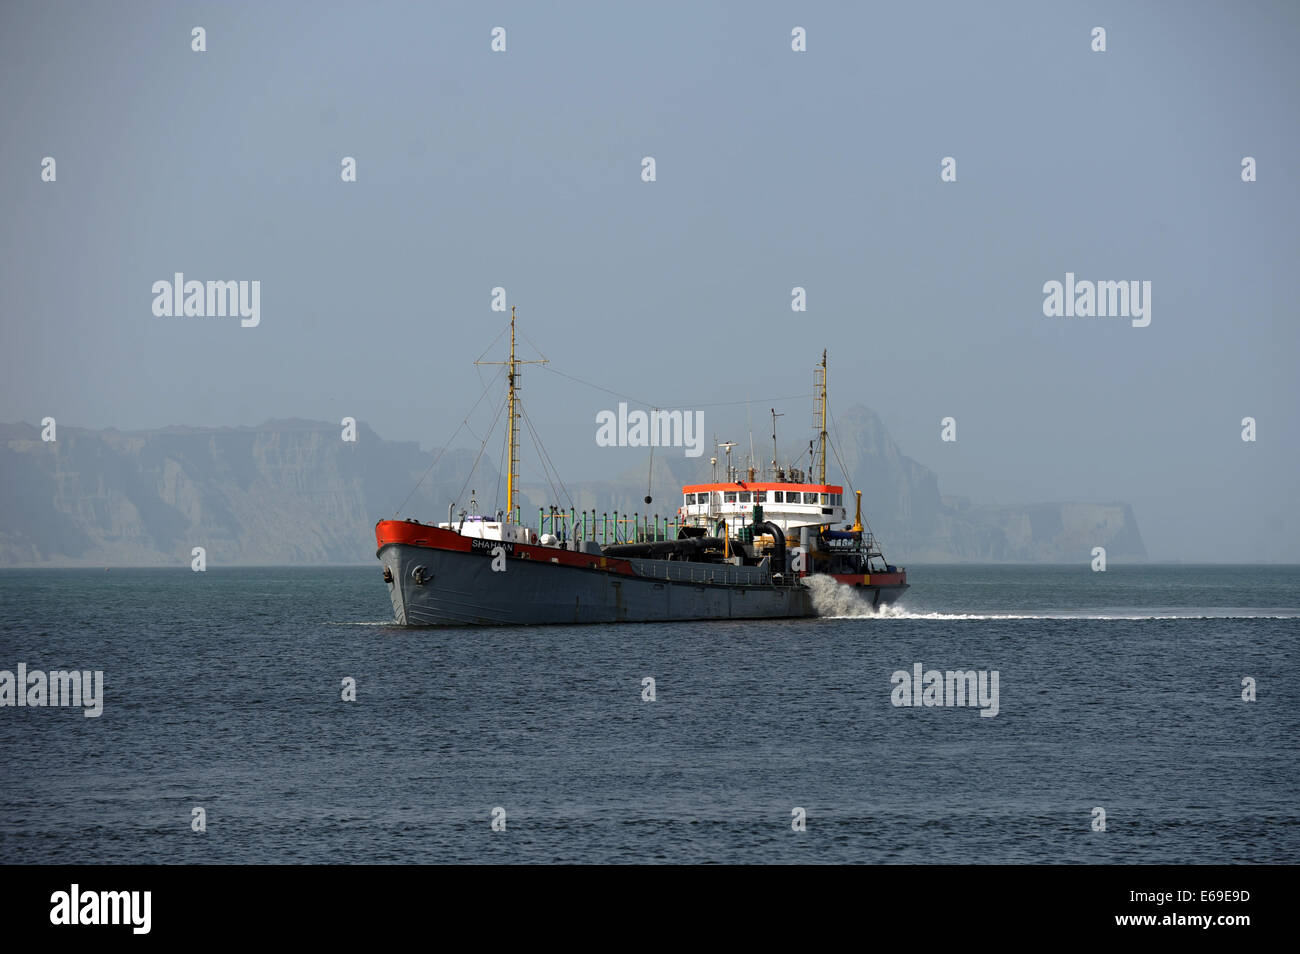 Islamabad. 18th Aug, 2014. Photo taken on Aug. 18, 2014 shows a ship near Gwadar Port in Balochistan province, Pakistan. Gwadar Port is a warm-water, deep-sea port situated on the Arabian Sea at Gwadar in Balochistan province of Pakistan. Gwadar Port is owned by the government-owned Gwadar Port Authority and operated by China Overseas Port Holding Company (COPHC). © Huang Zongzhi/Xinhua/Alamy Live News Stock Photo